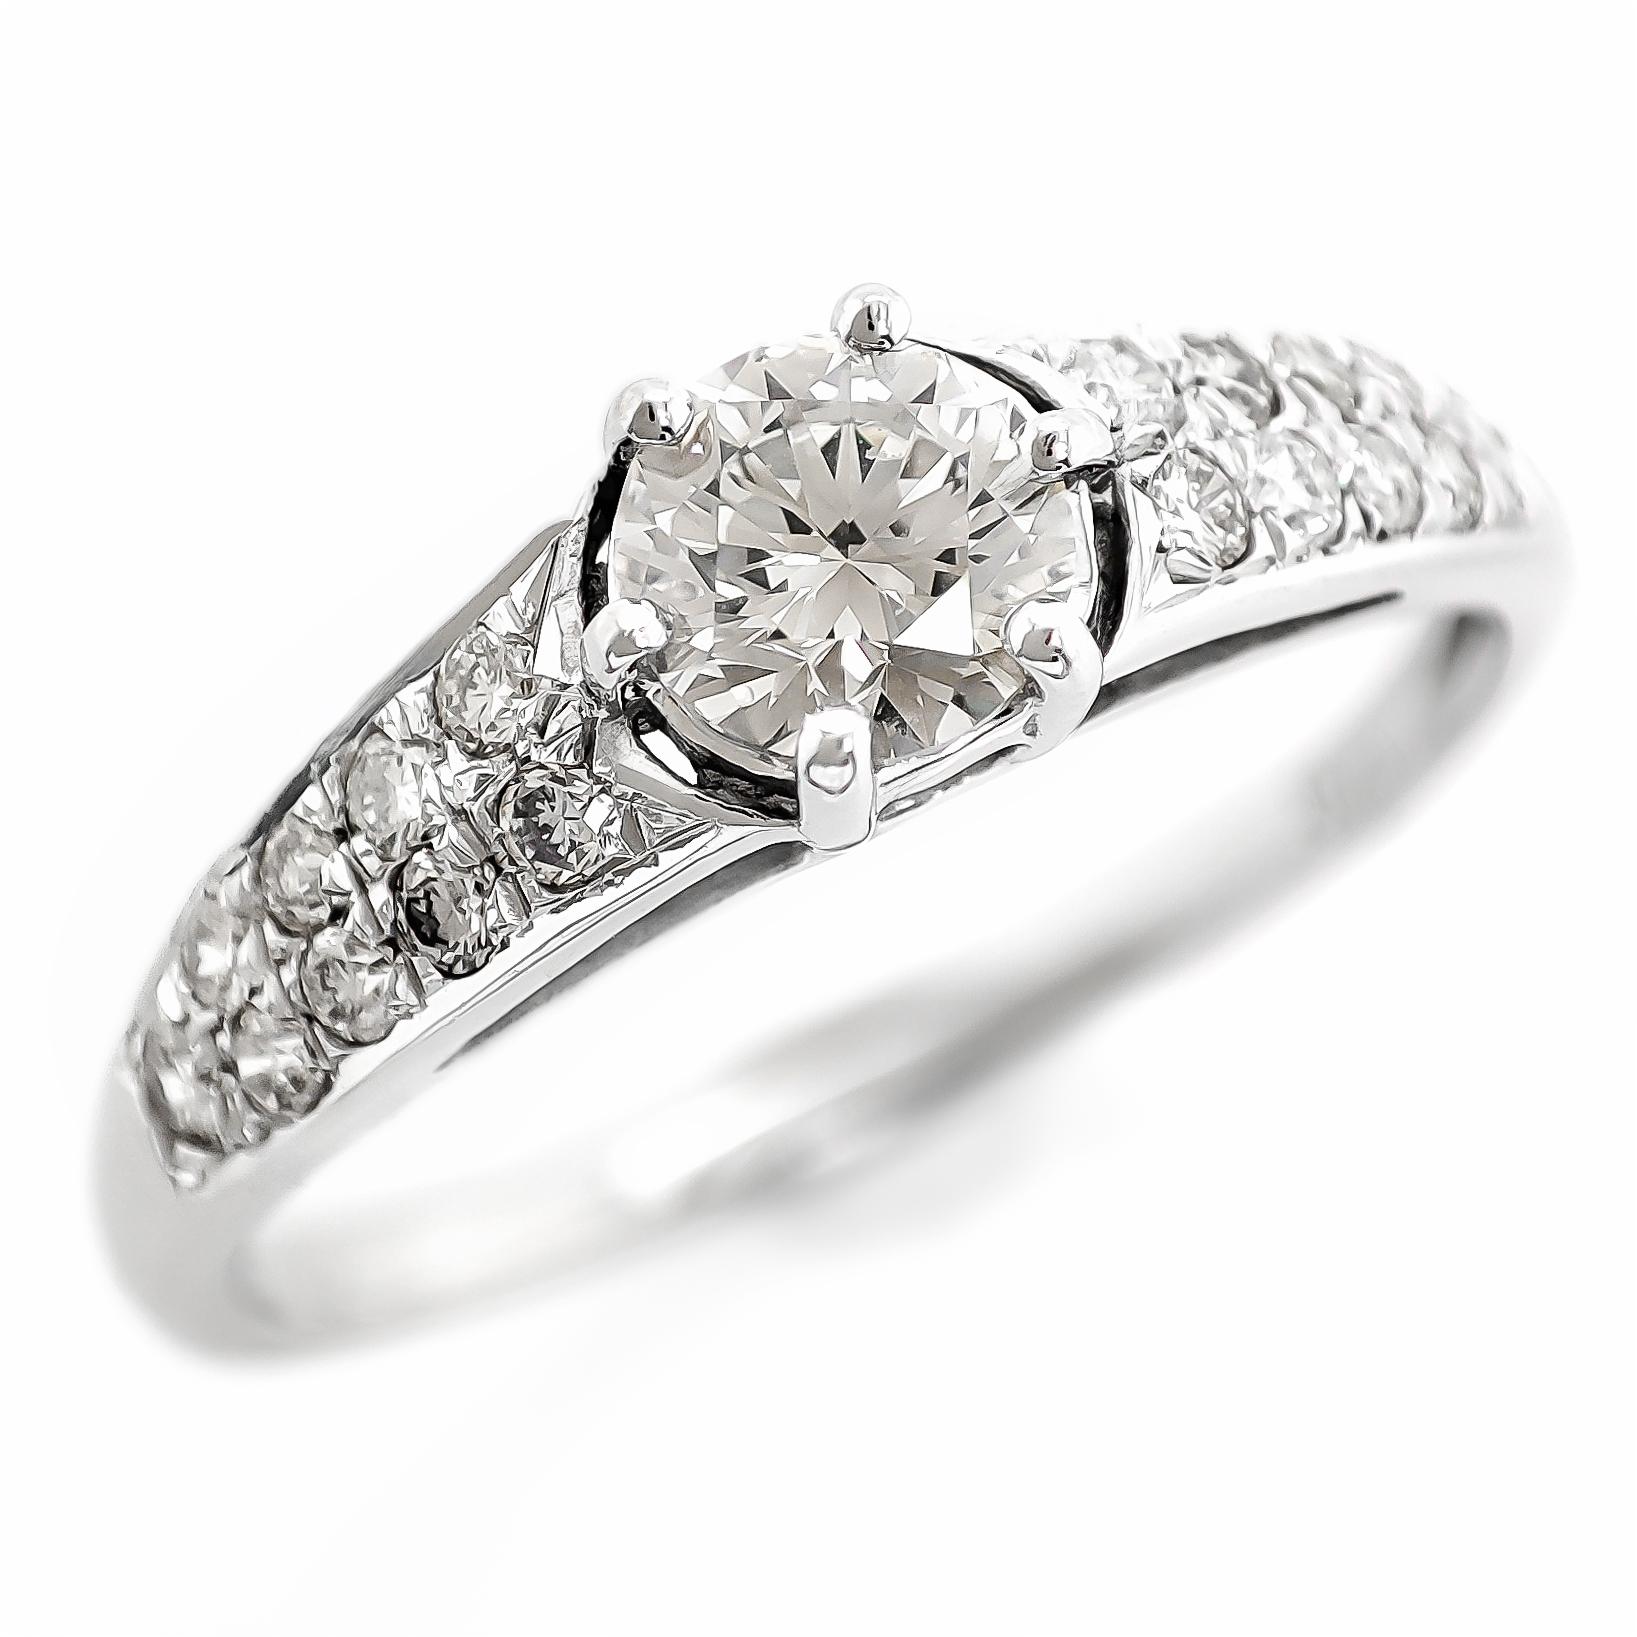 FOR US CUSTOMER NO VAT!

You've described a 0.60 carat total weight (CTW) round diamond ring set in 14K white gold. The central diamond in this elegant ring weighs 0.42 carats and has a color grade of K and a clarity grade of VS1, indicating a warm